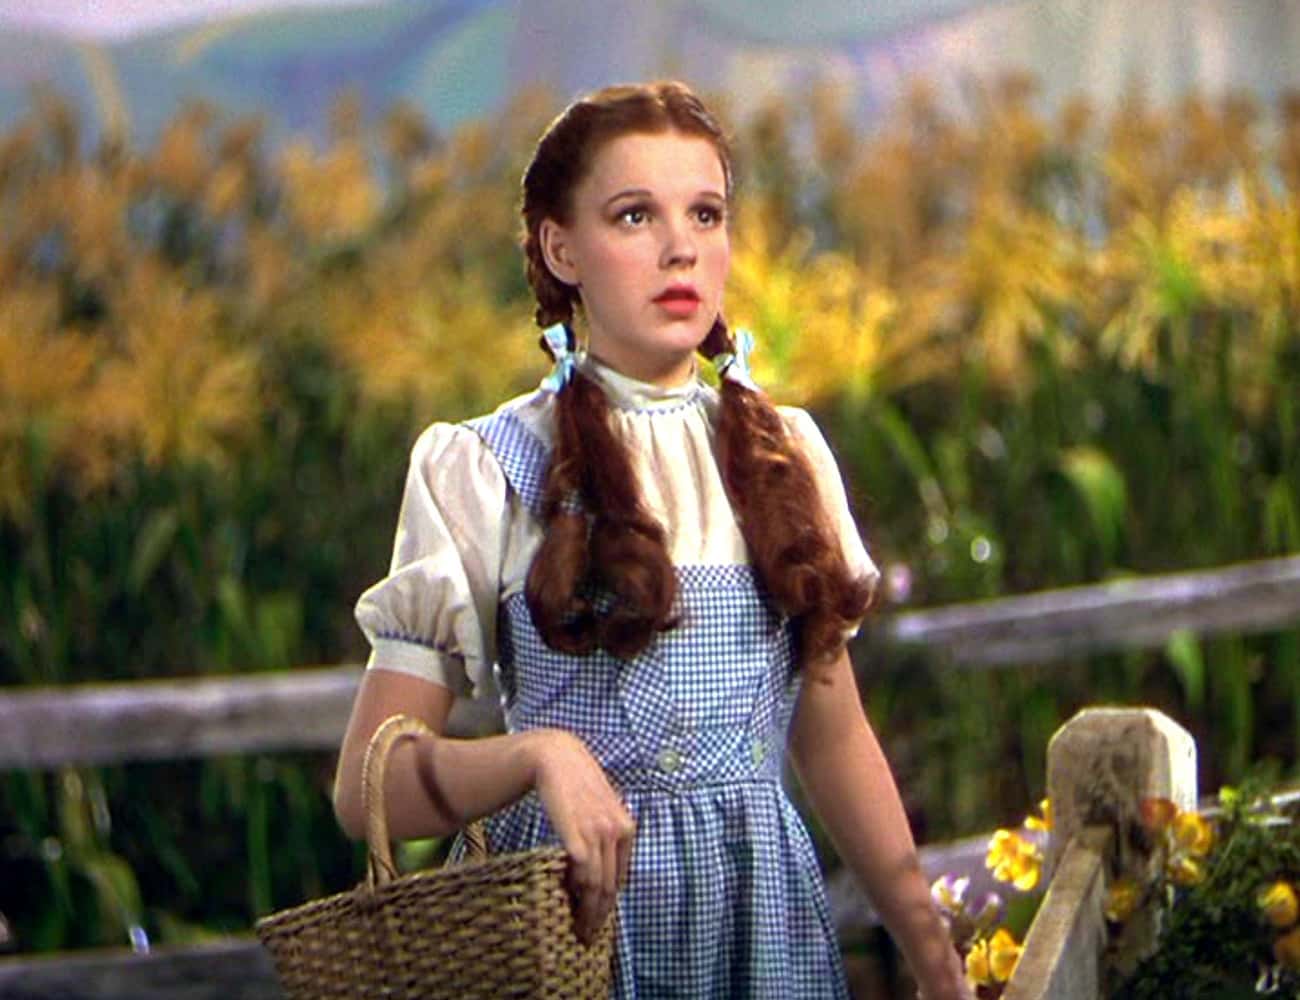 Dorothy's Dress From 'The Wizard of Oz' Was Given To The Head Of A College Theater